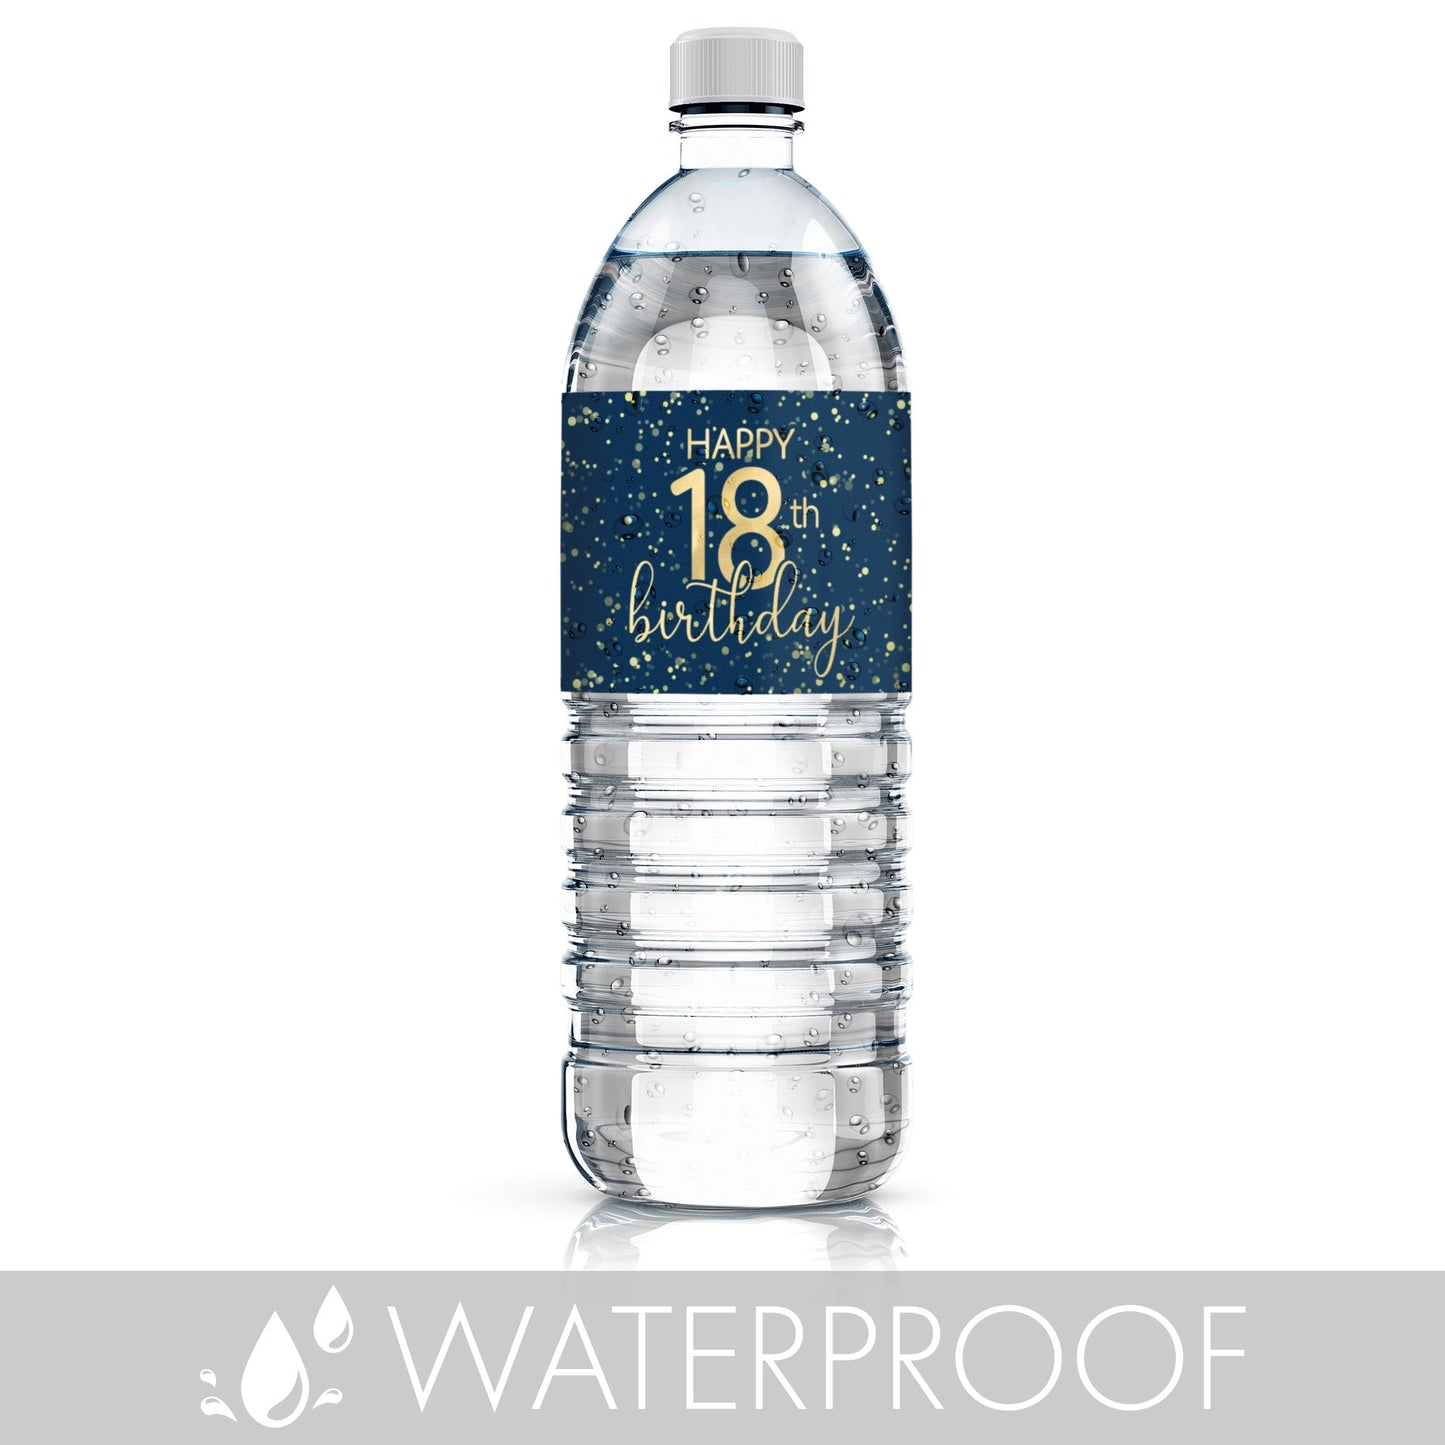 A simple yet sophisticated water bottle label in navy blue with bold gold lettering that celebrates the milestone of an 18th birthday with elegance and style